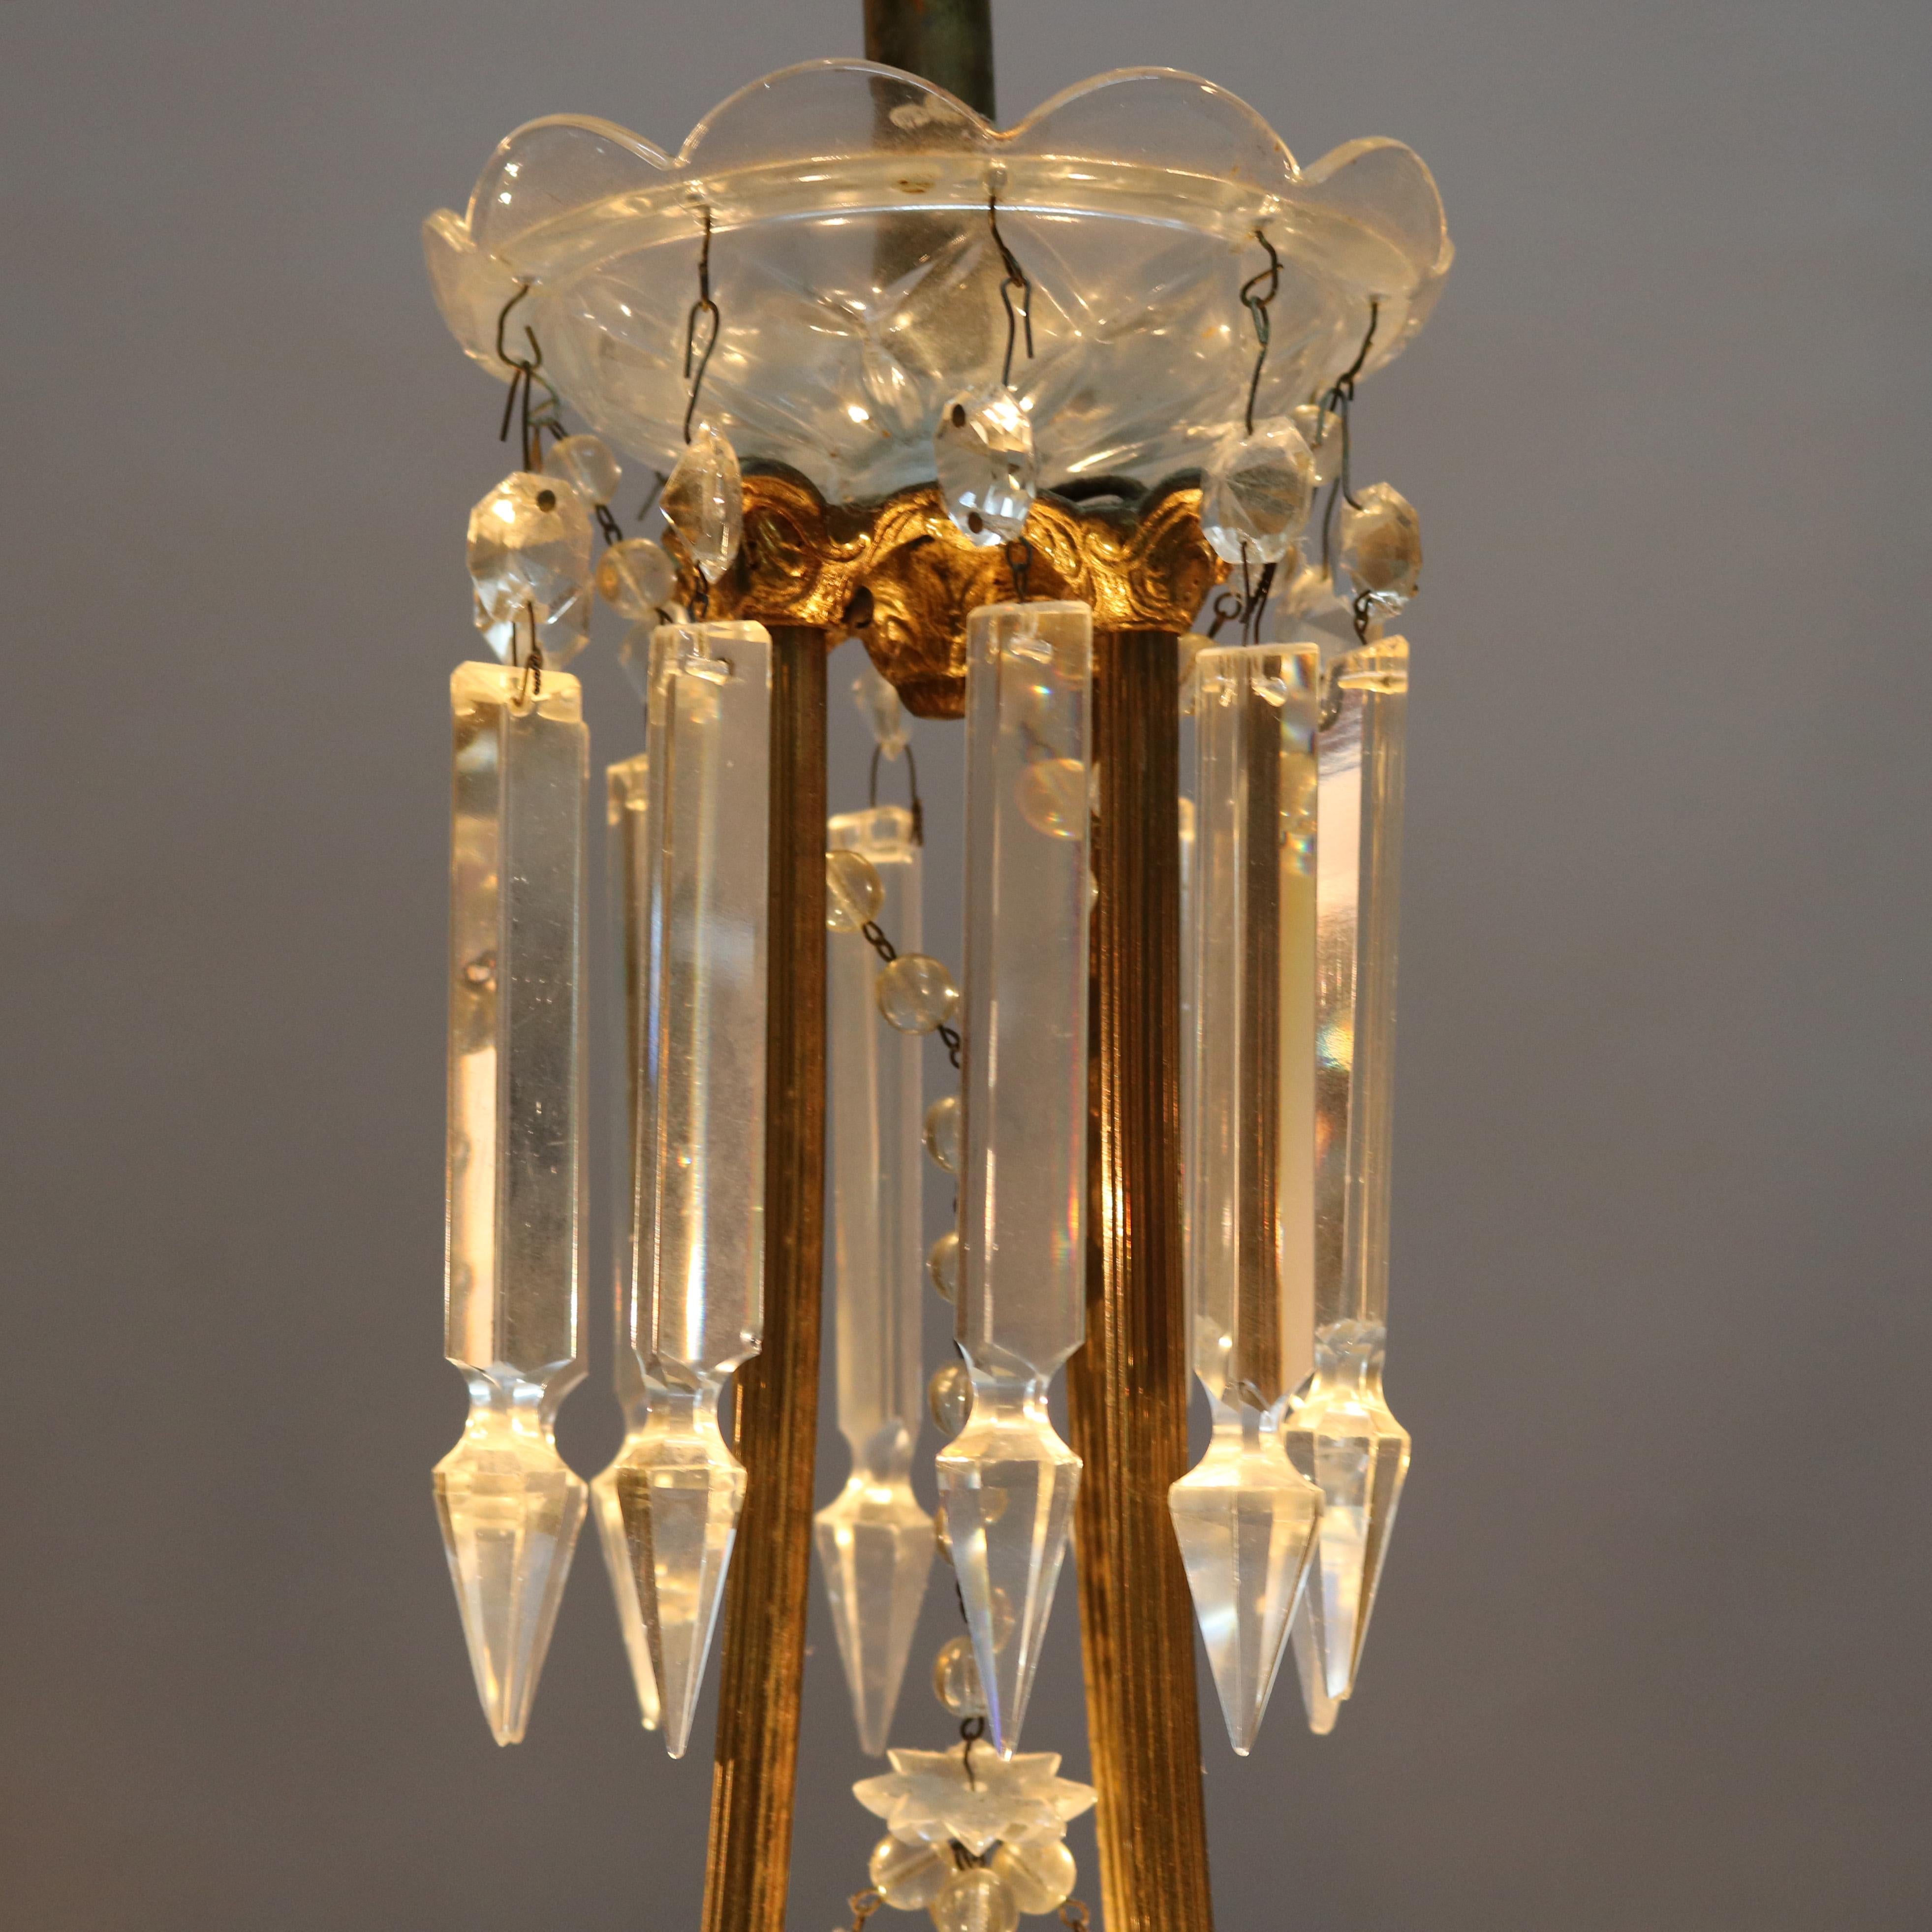 Antique French Style Bronzed Four-Light Chandelier with Draped Crystals, c1920 For Sale 3